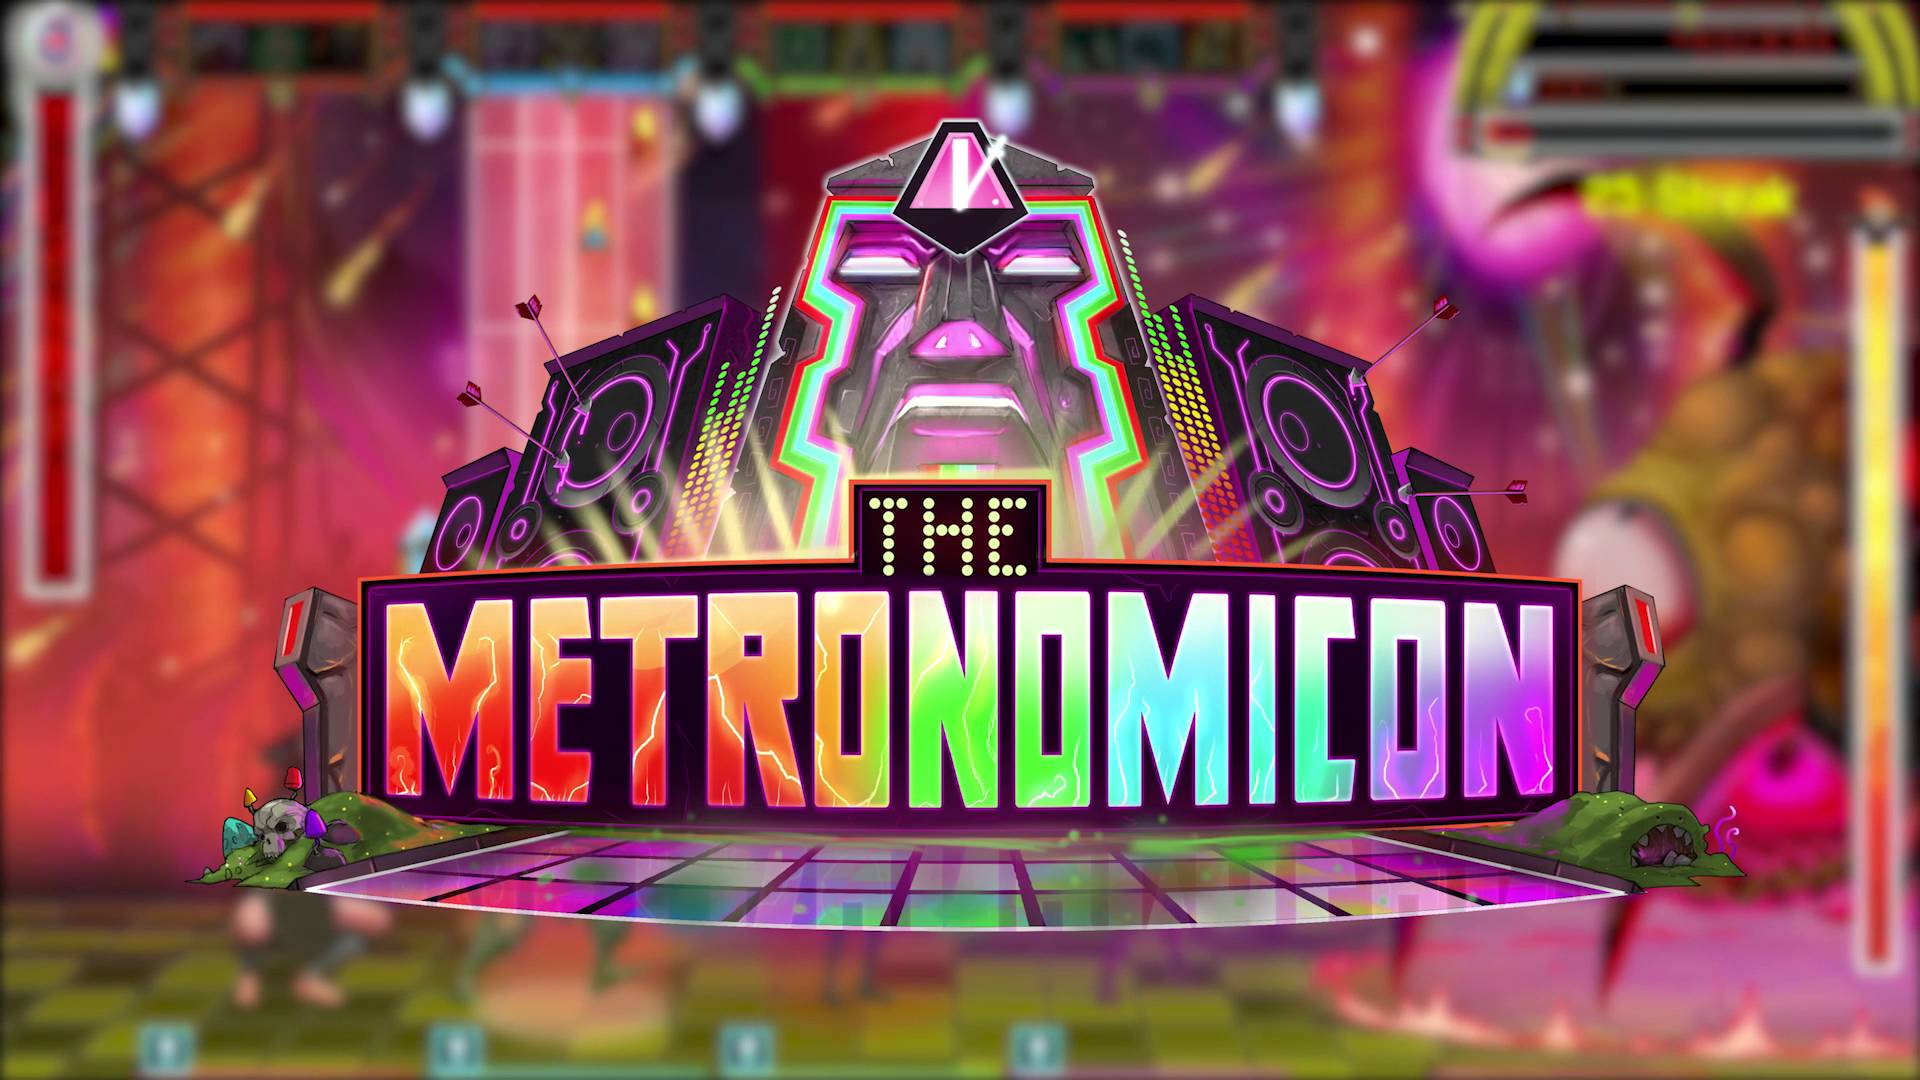 The Metronomicon download the new for windows